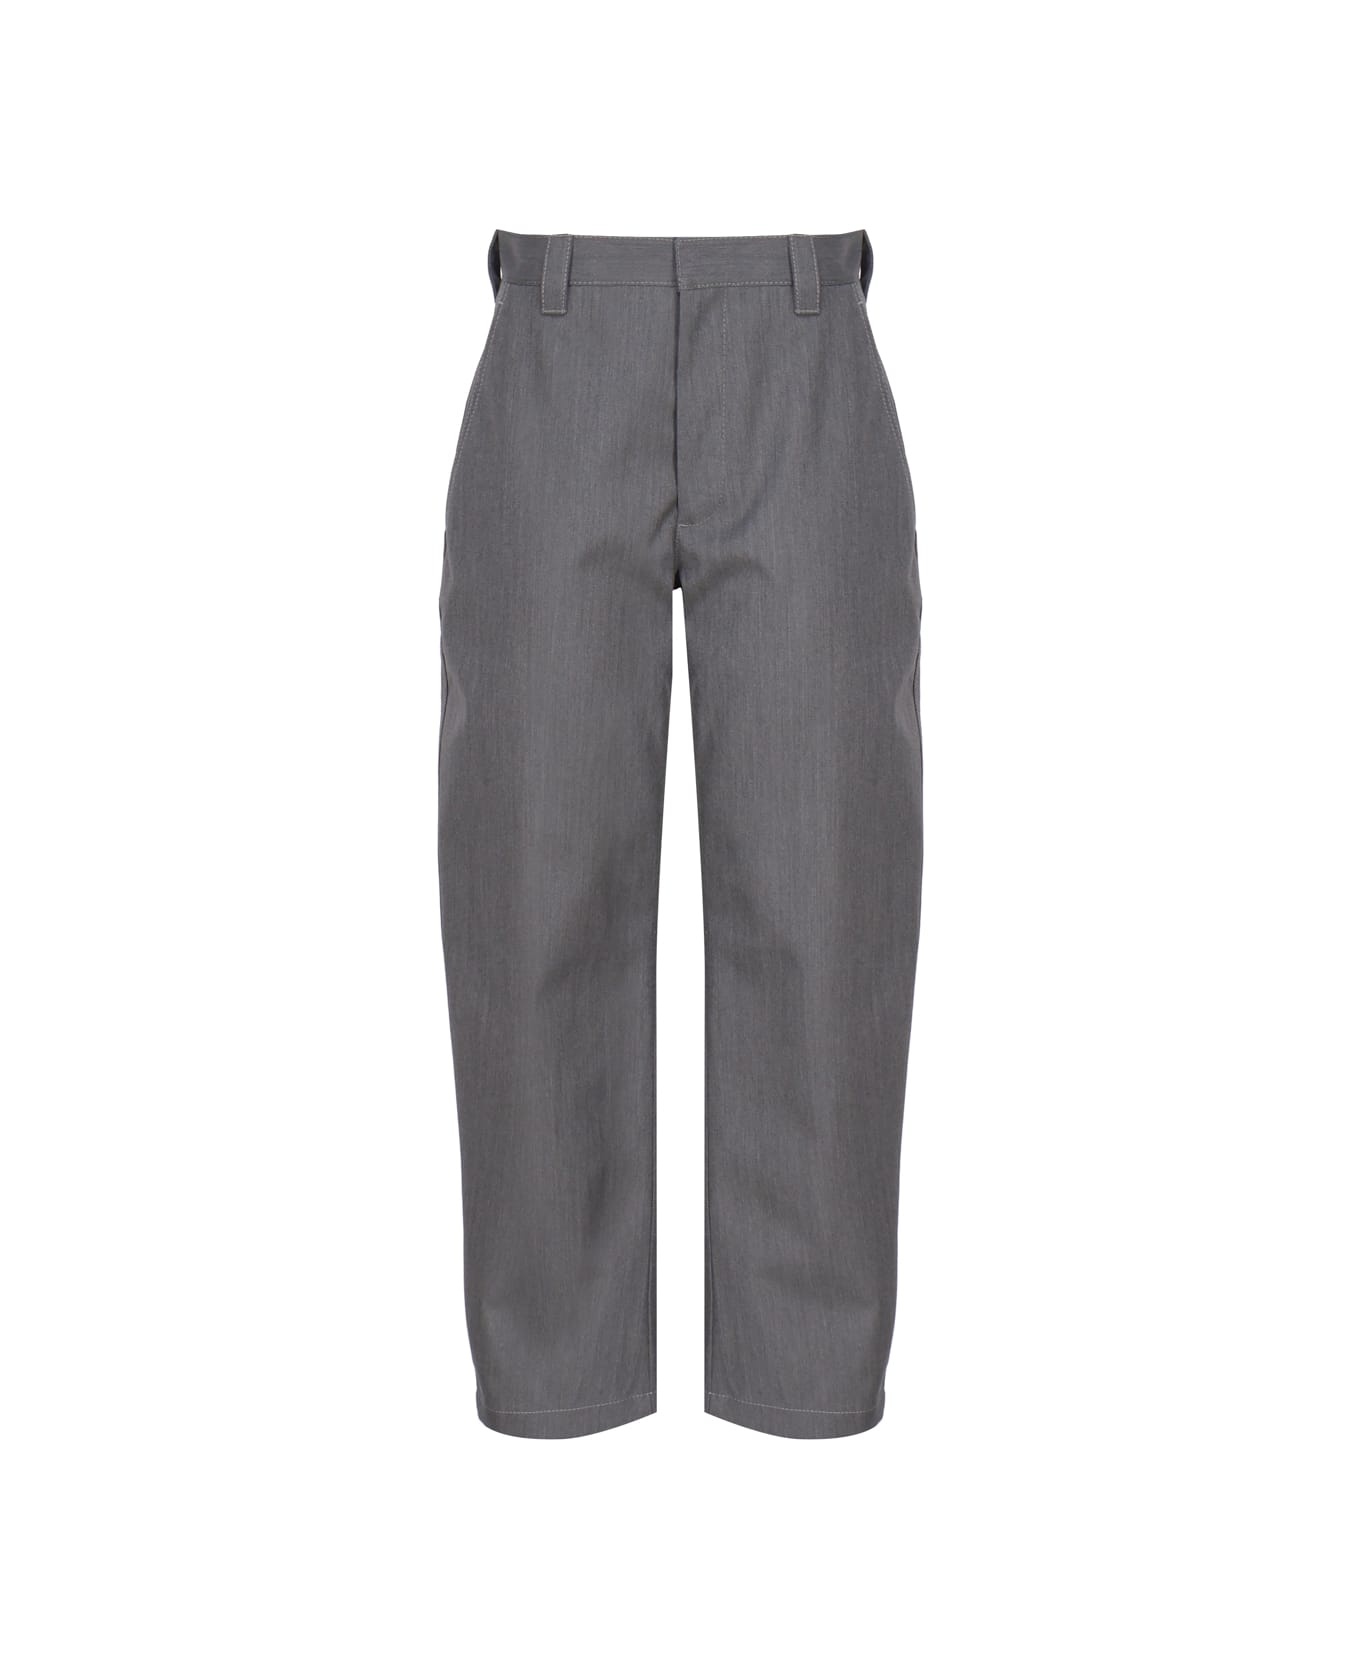 Bottega Veneta Tapered Trousers In Bonded Wool And Cotton - Charcoal/cane sugar ボトムス